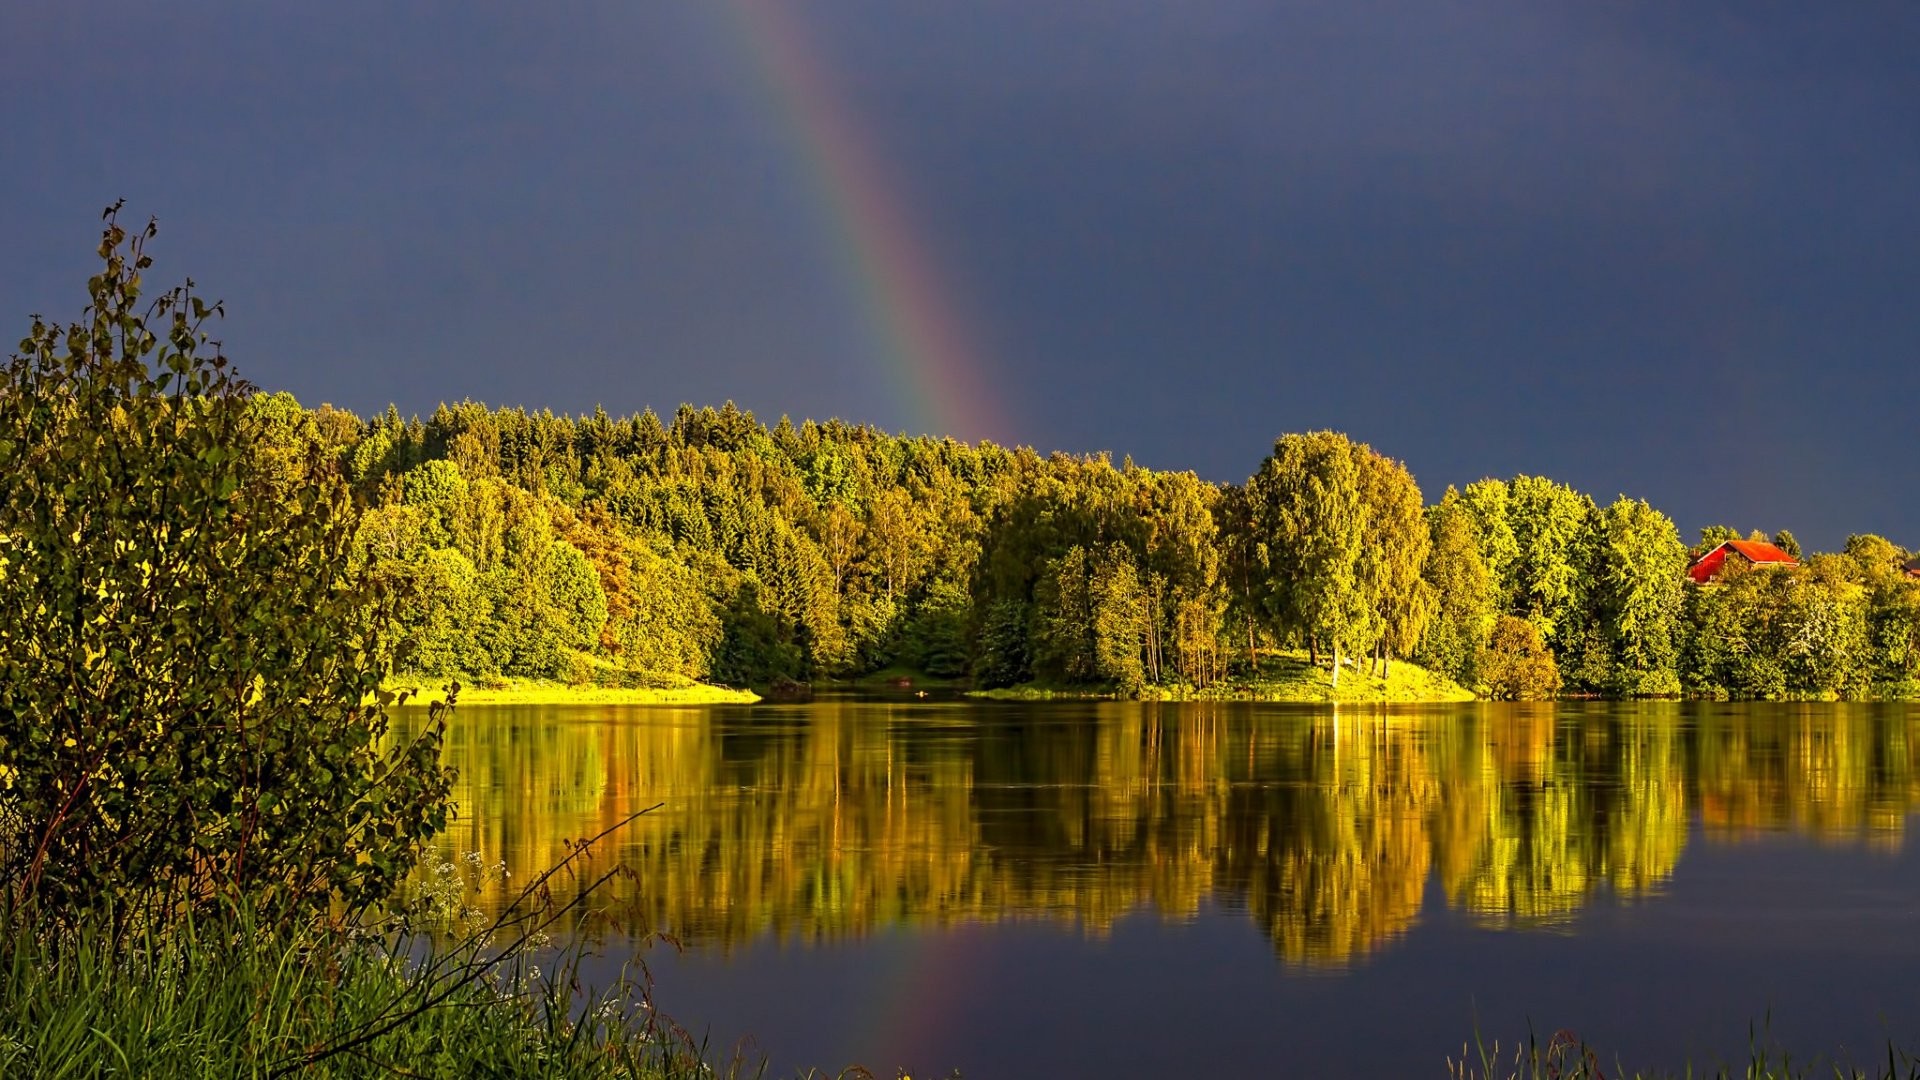 General 1920x1080 rainbows sky landscape trees nature reflection